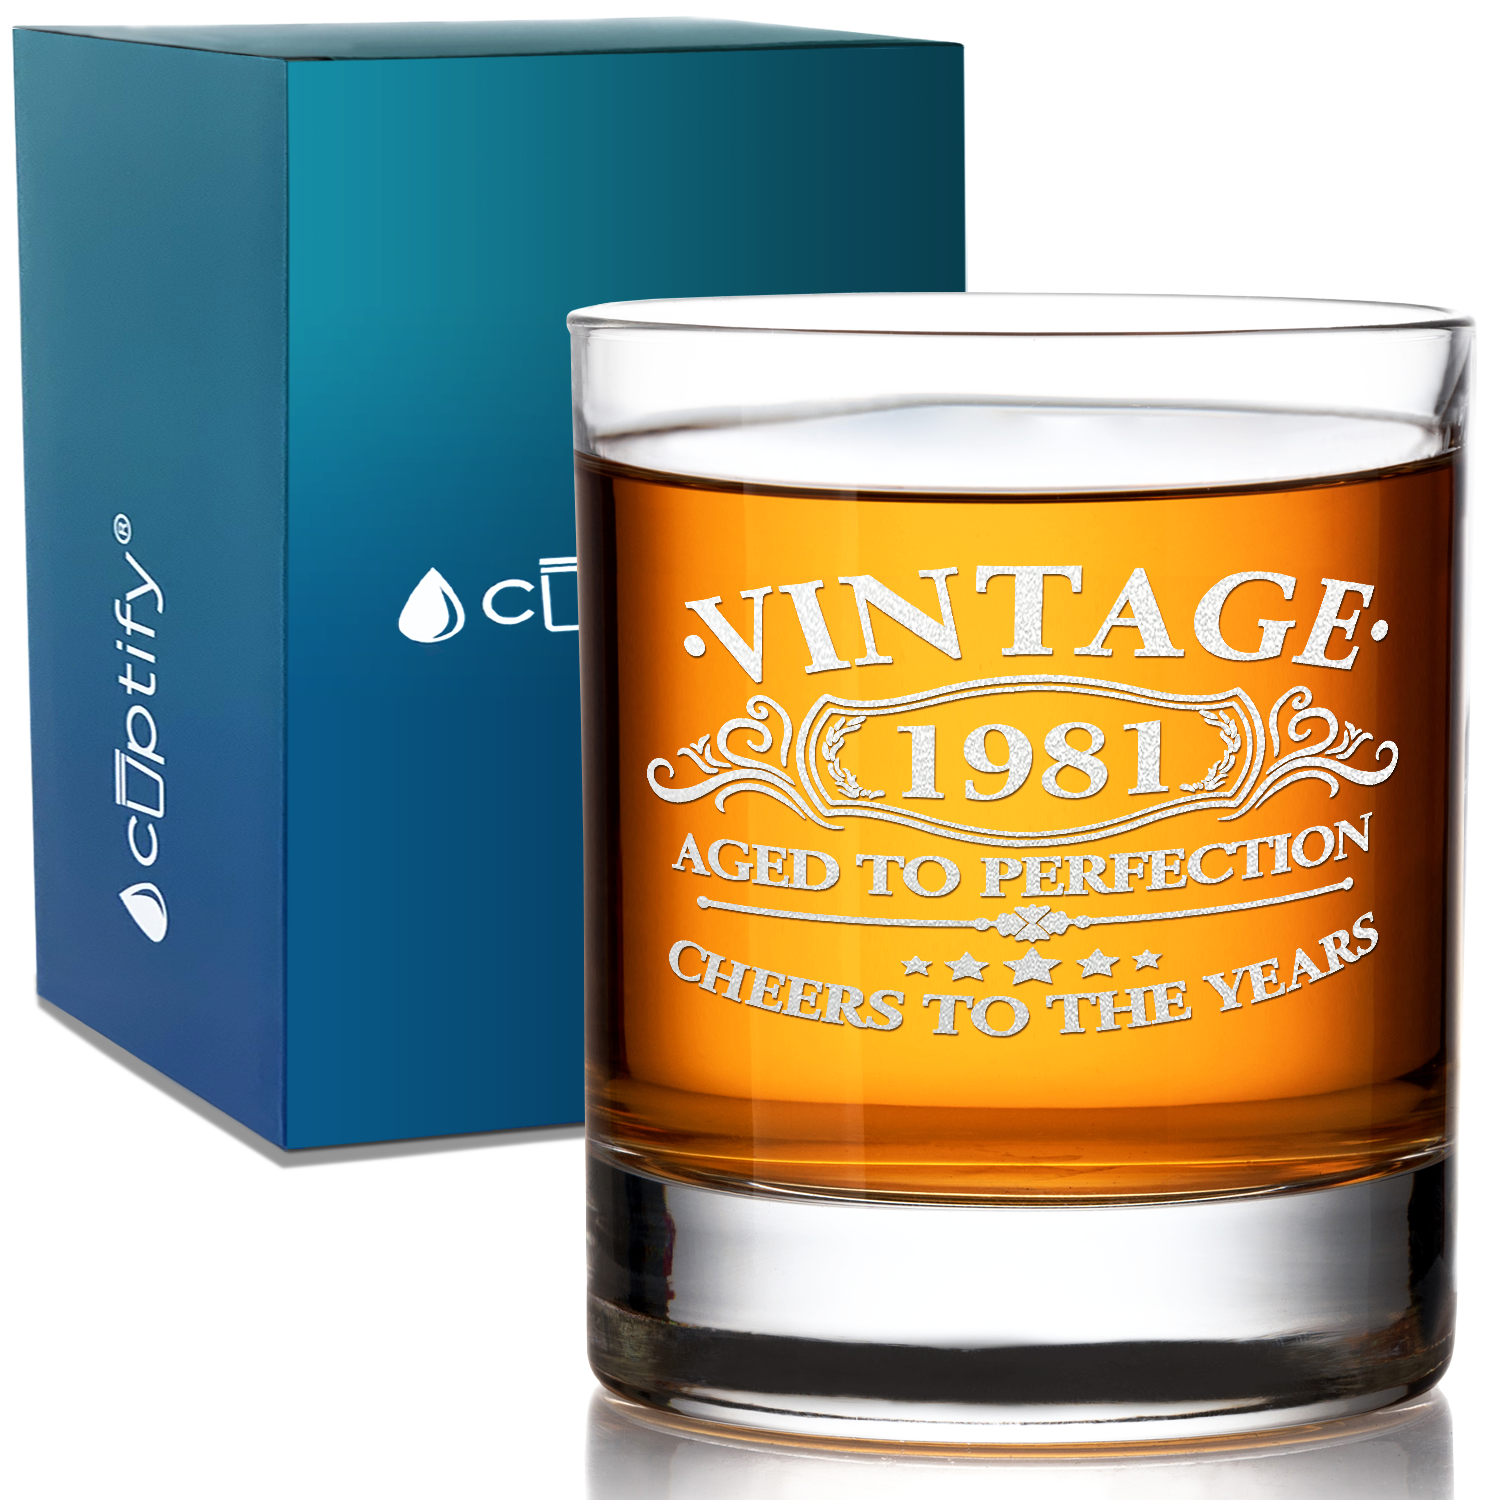 Vintage Aged To Perfection Cheers To 40 Years 1981 Laser Engraved on 10.25oz Old Fashion Glass